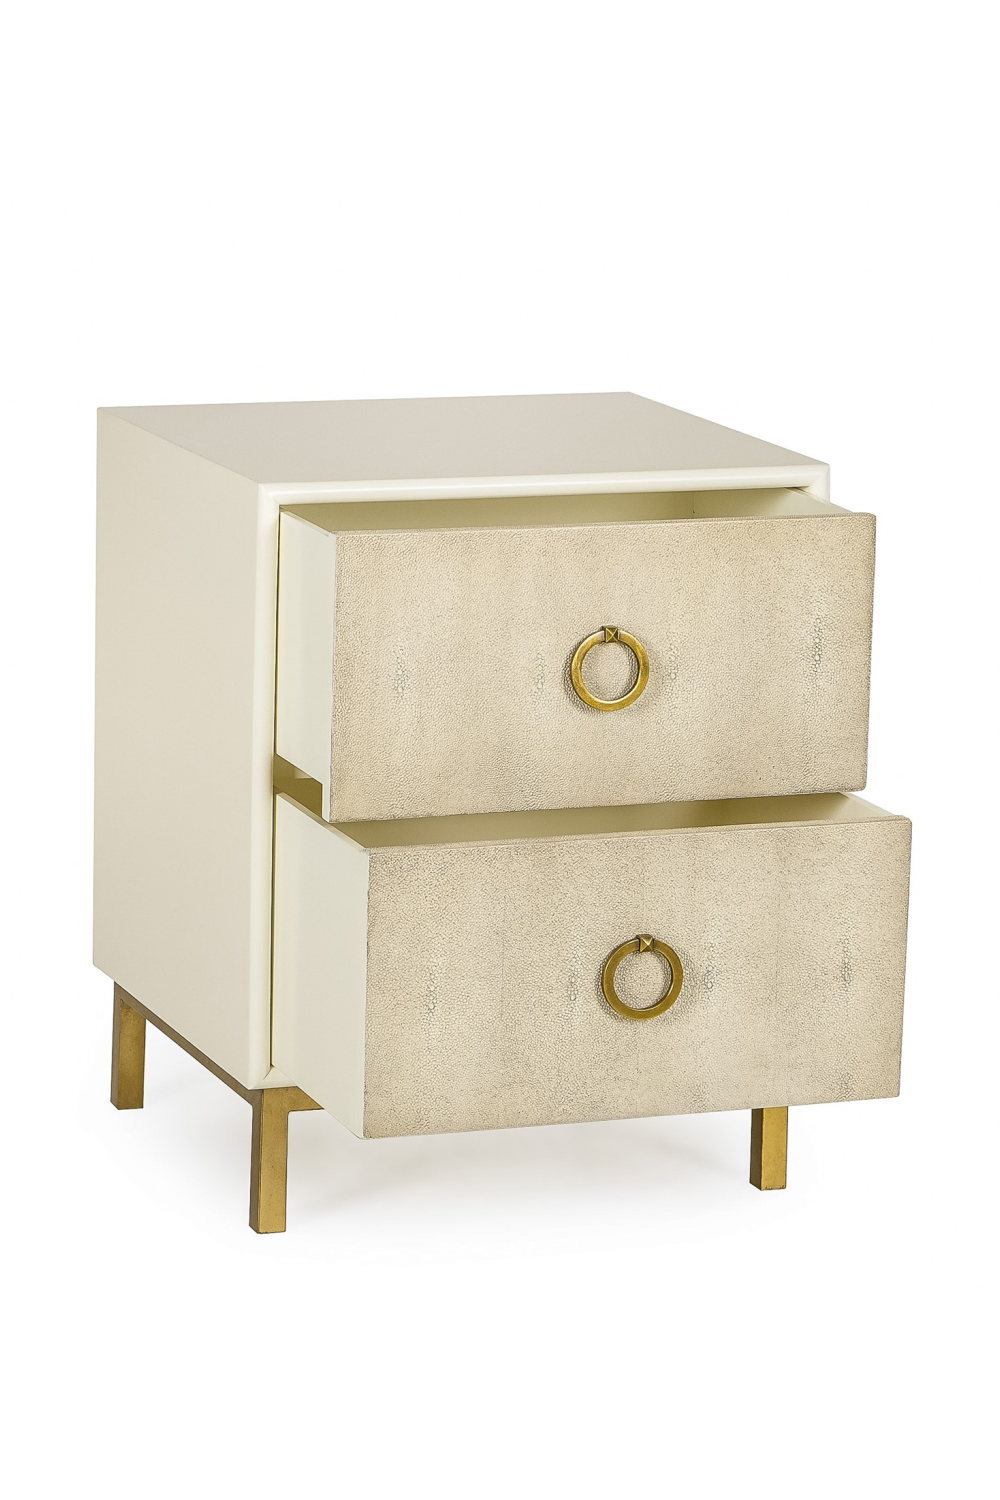 Cream Shagreen Bedside Table with Drawers | Andrew Martin | OROA